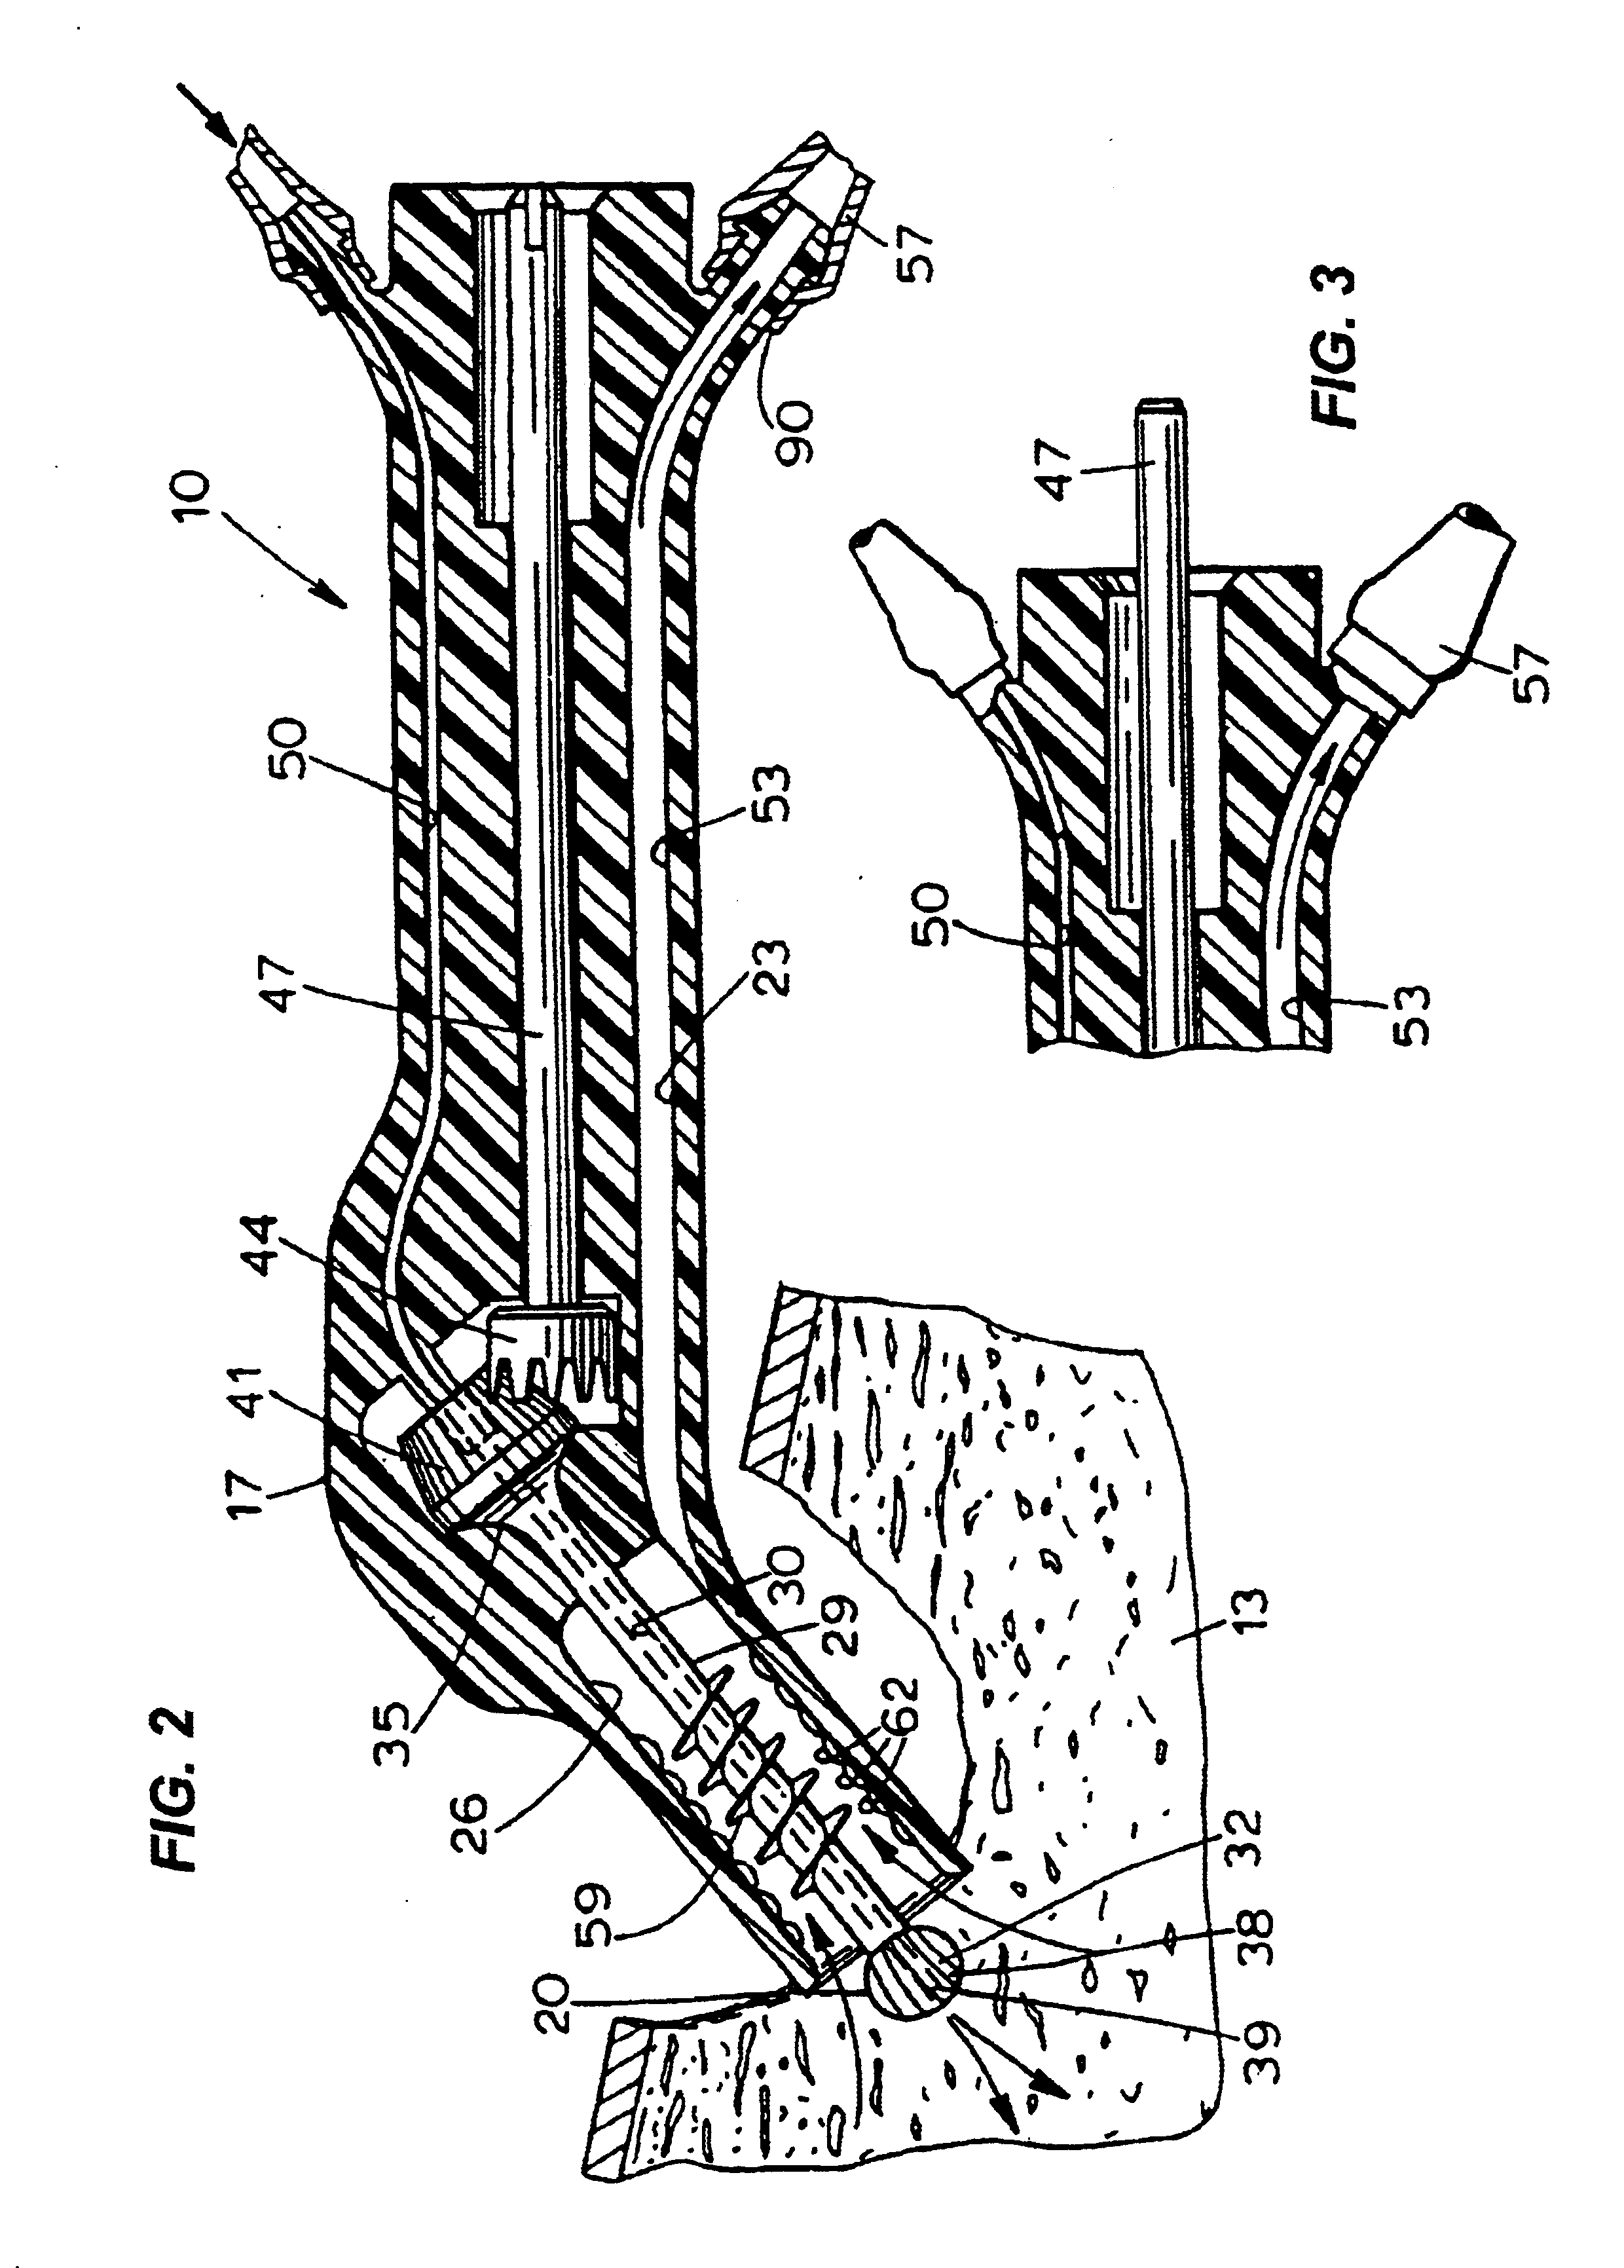 Method and apparatus for extracting bone marrow